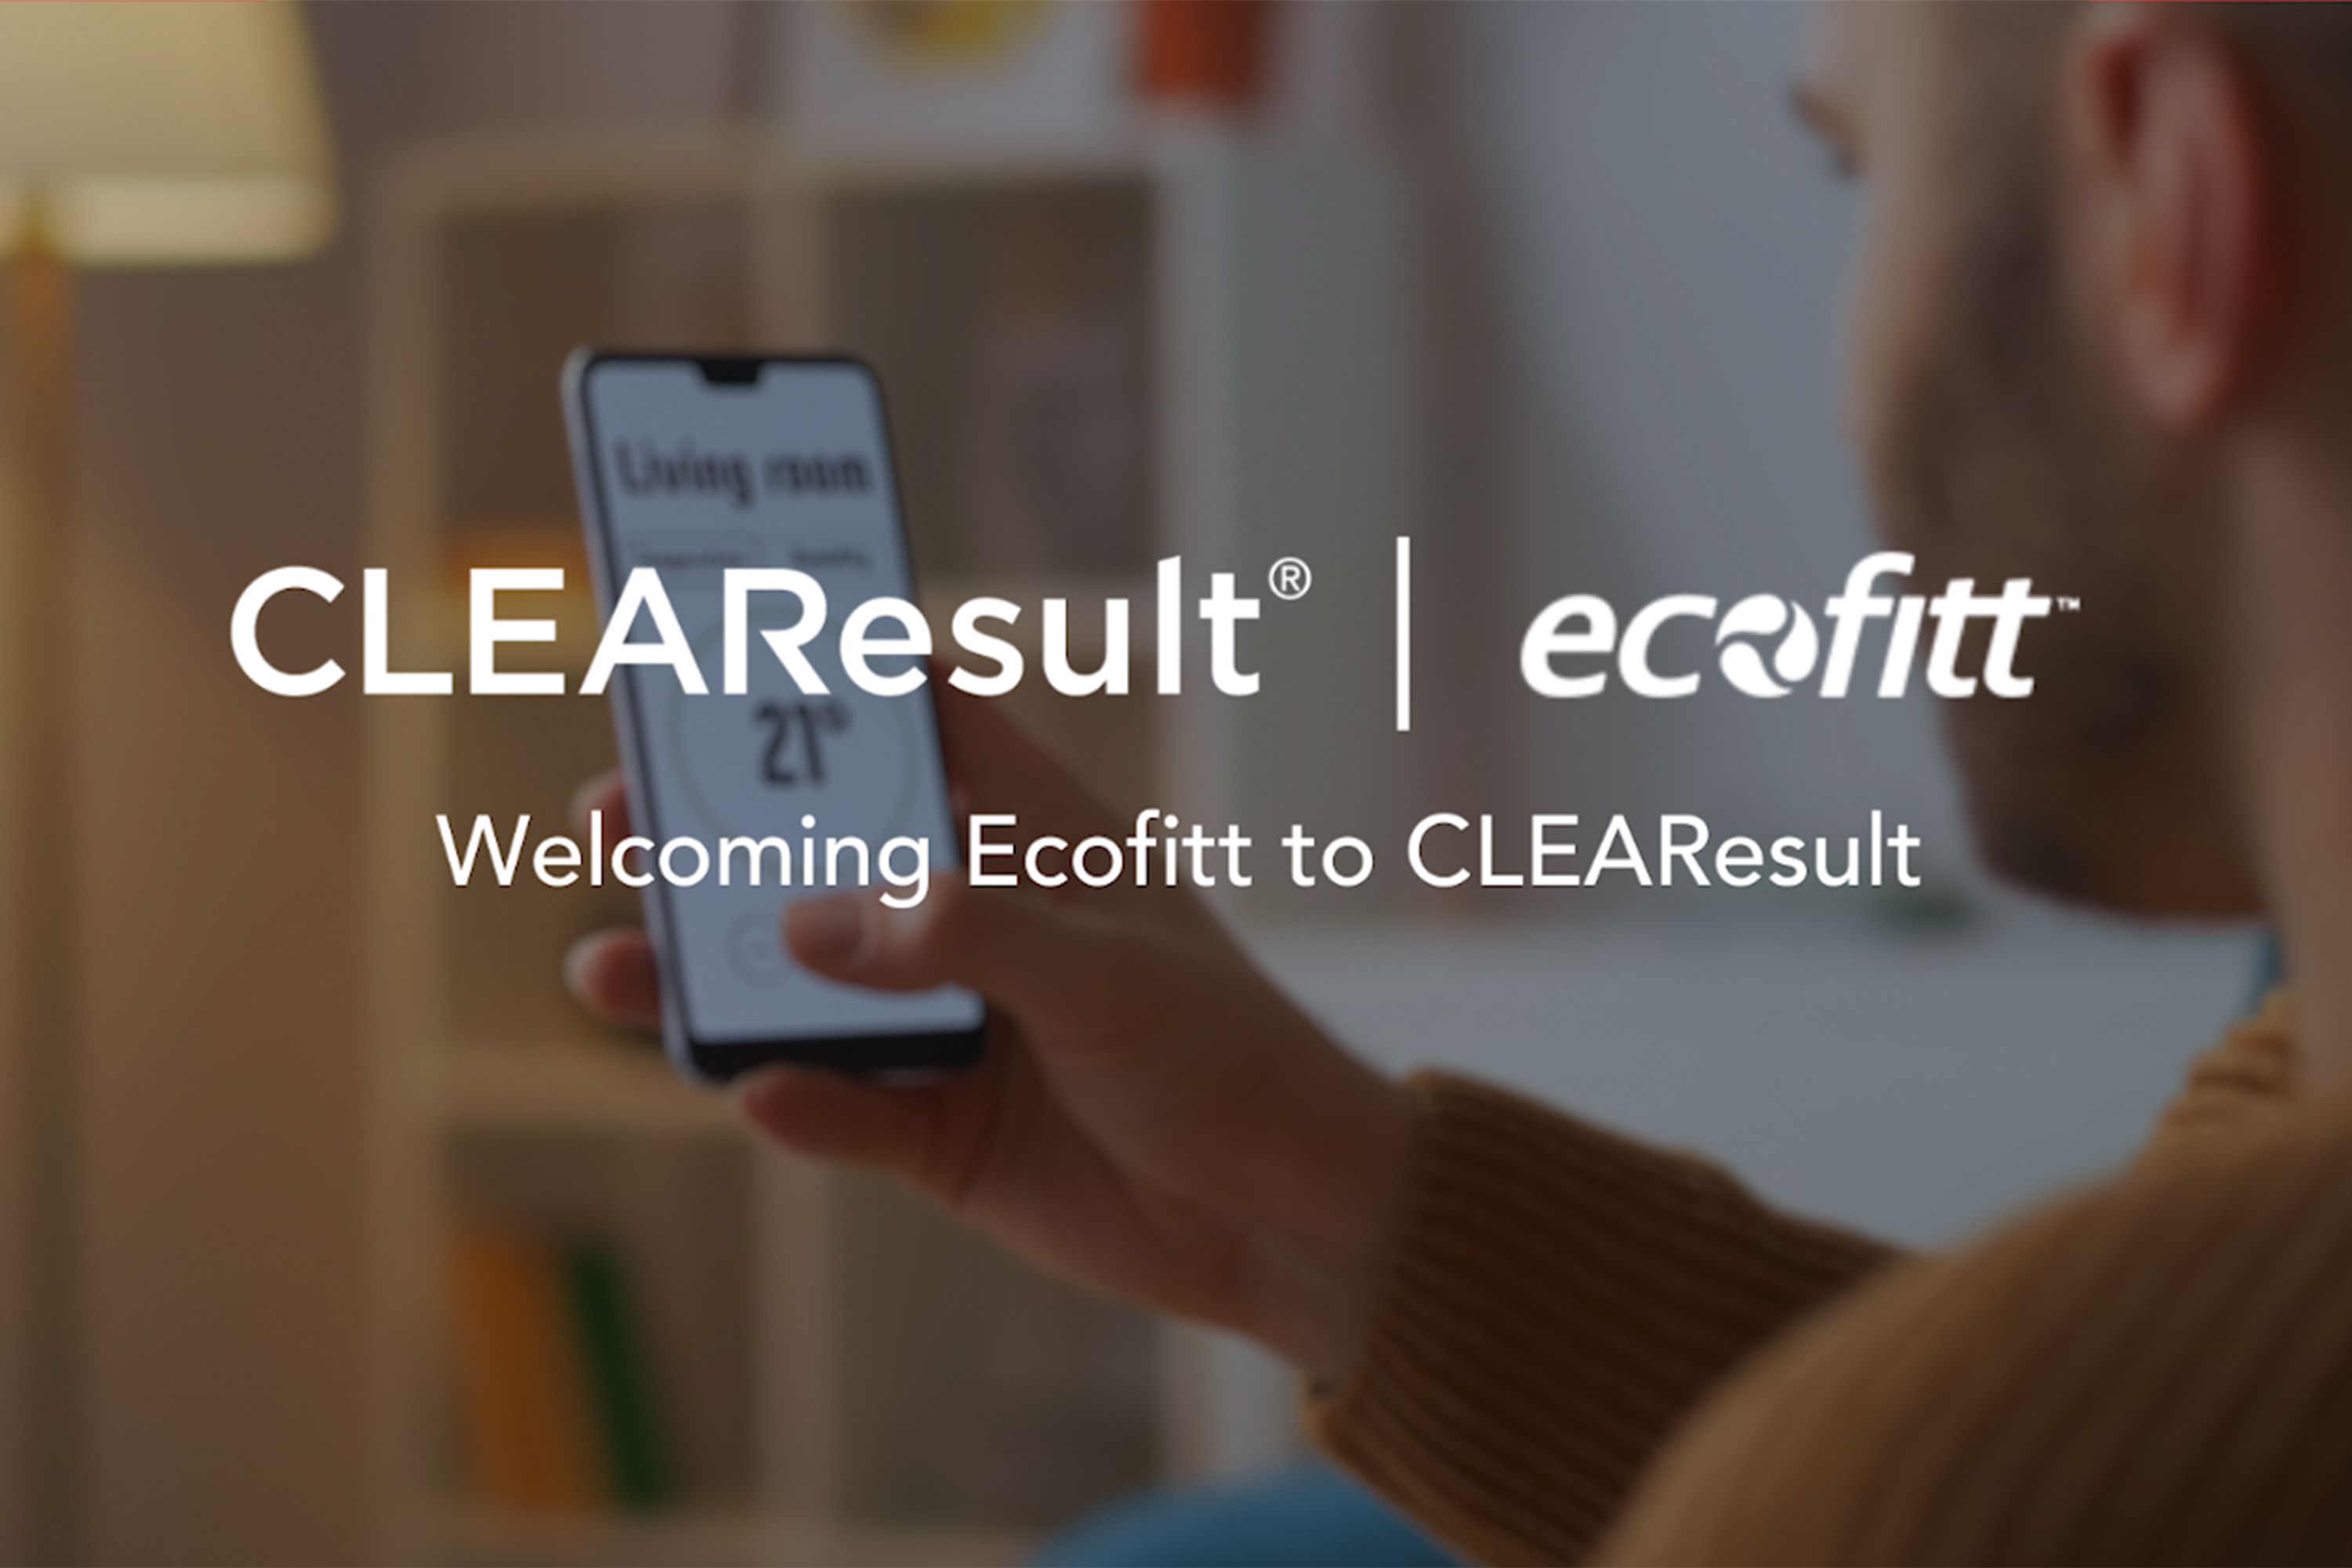 Press Release: Welcoming Ecofitt to CLEAResult